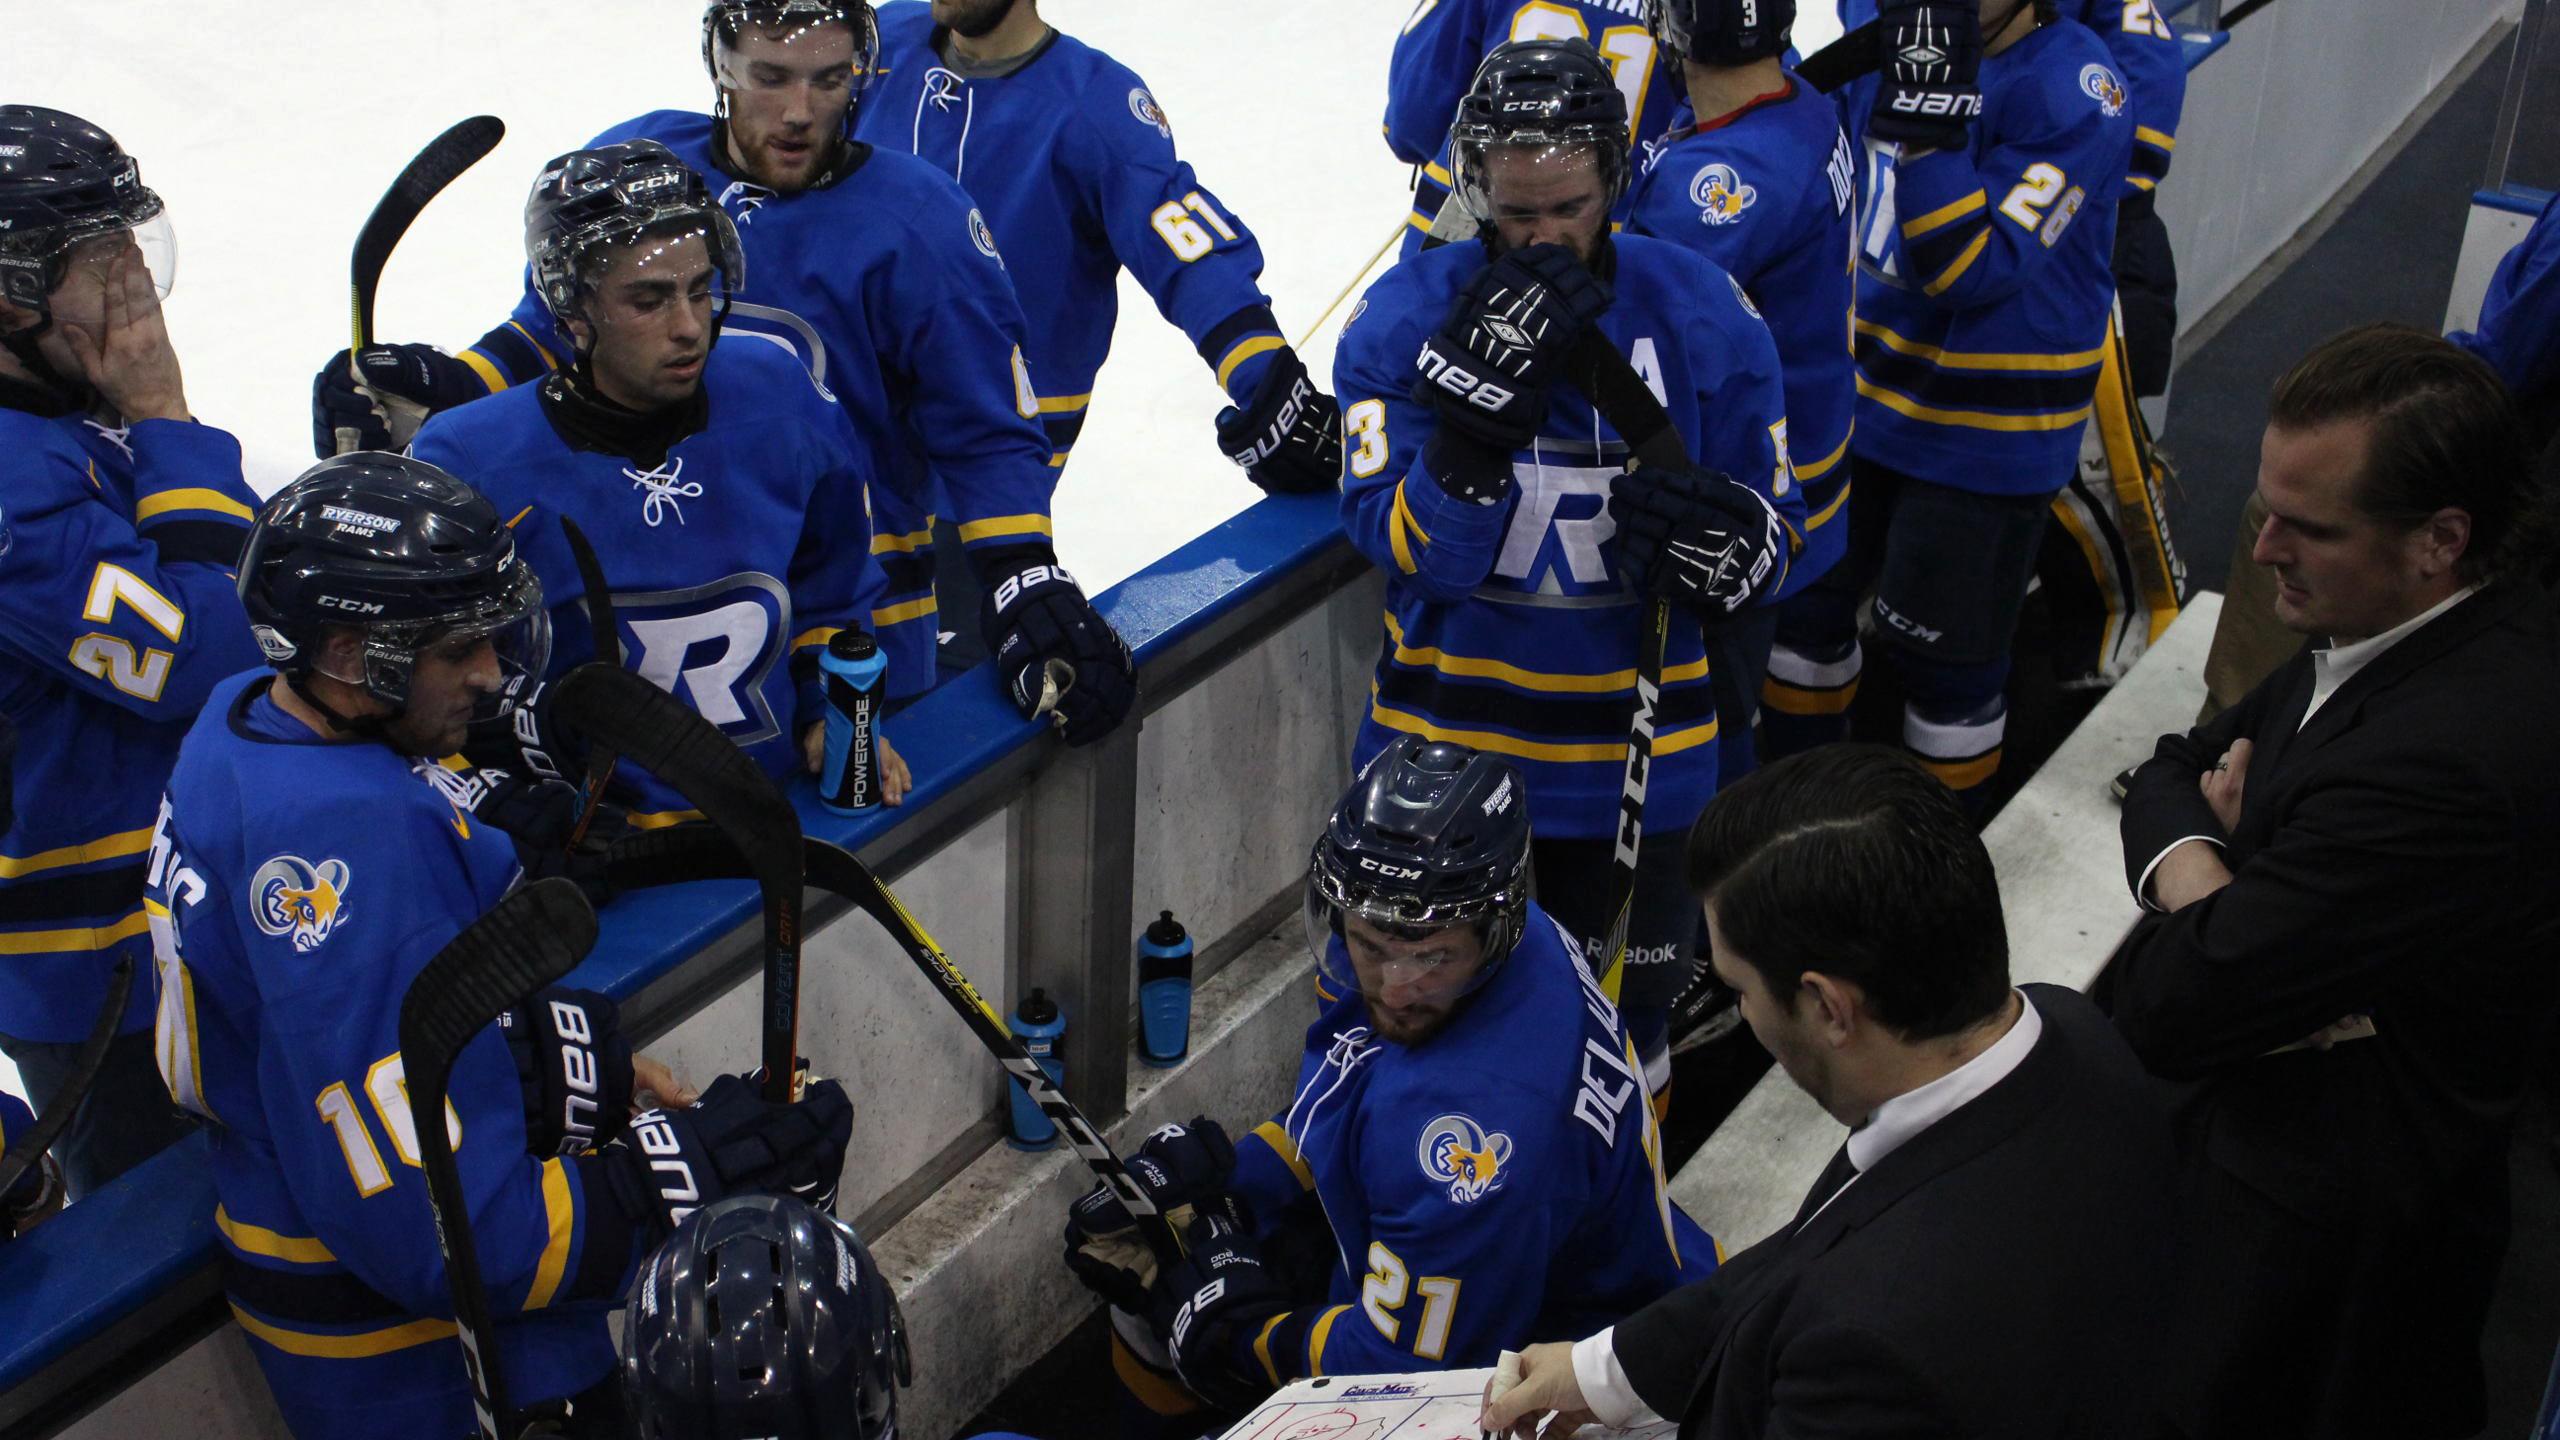 The Ryerson men’s hockey team is having its best start to an OUA season in program history. PHOTO: WILL BROWN